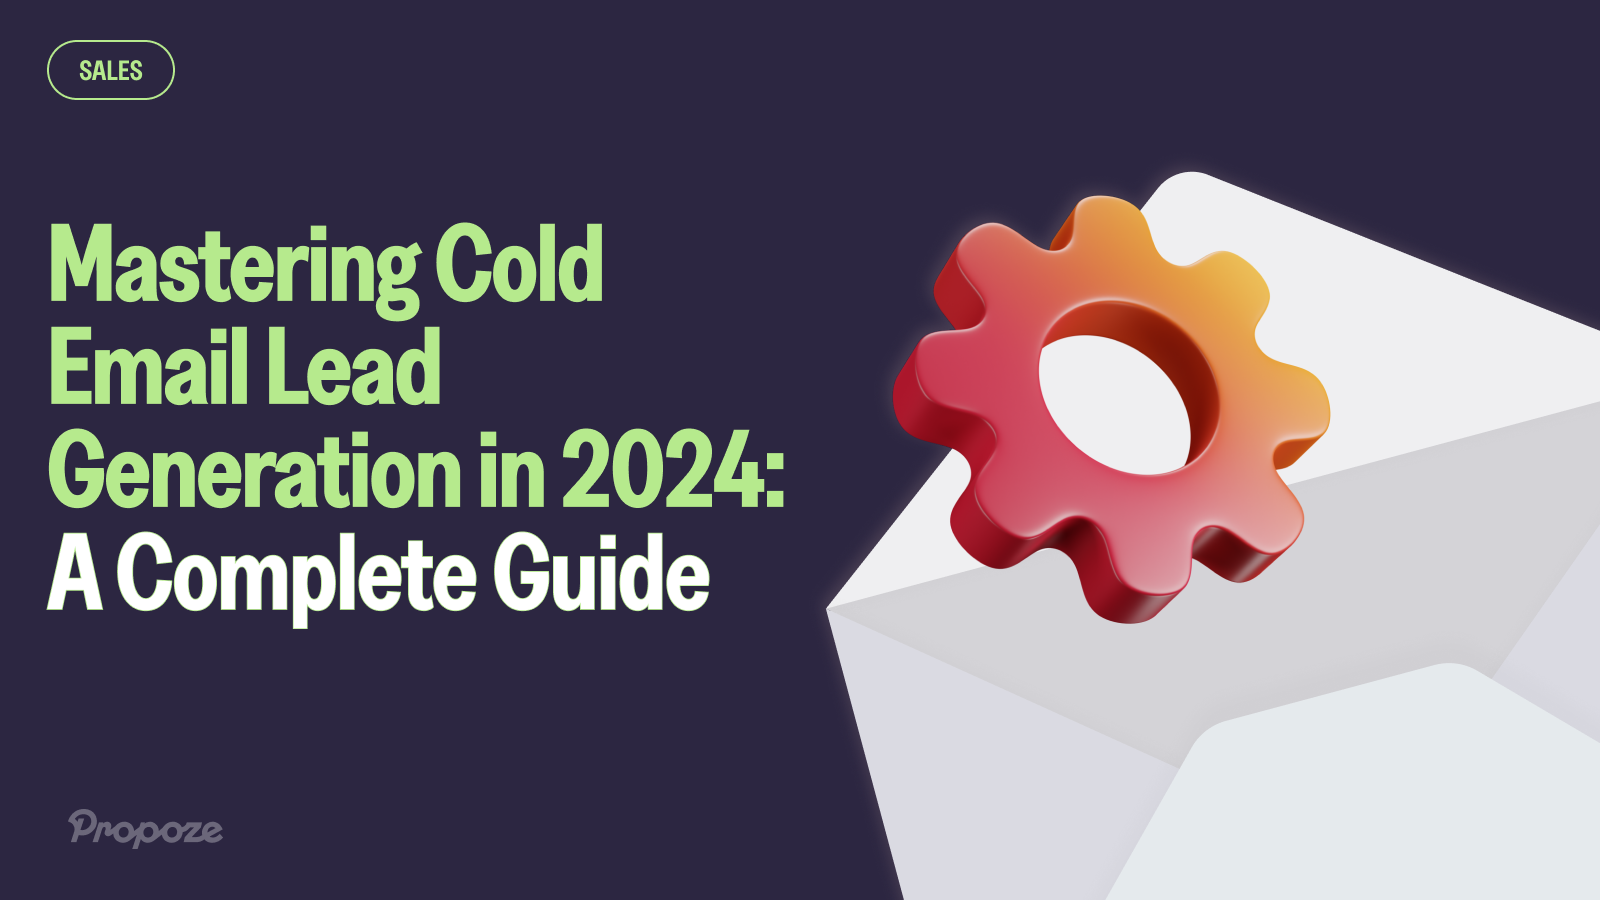 Mastering Cold Email Lead Generation in 2024: A Complete Guide